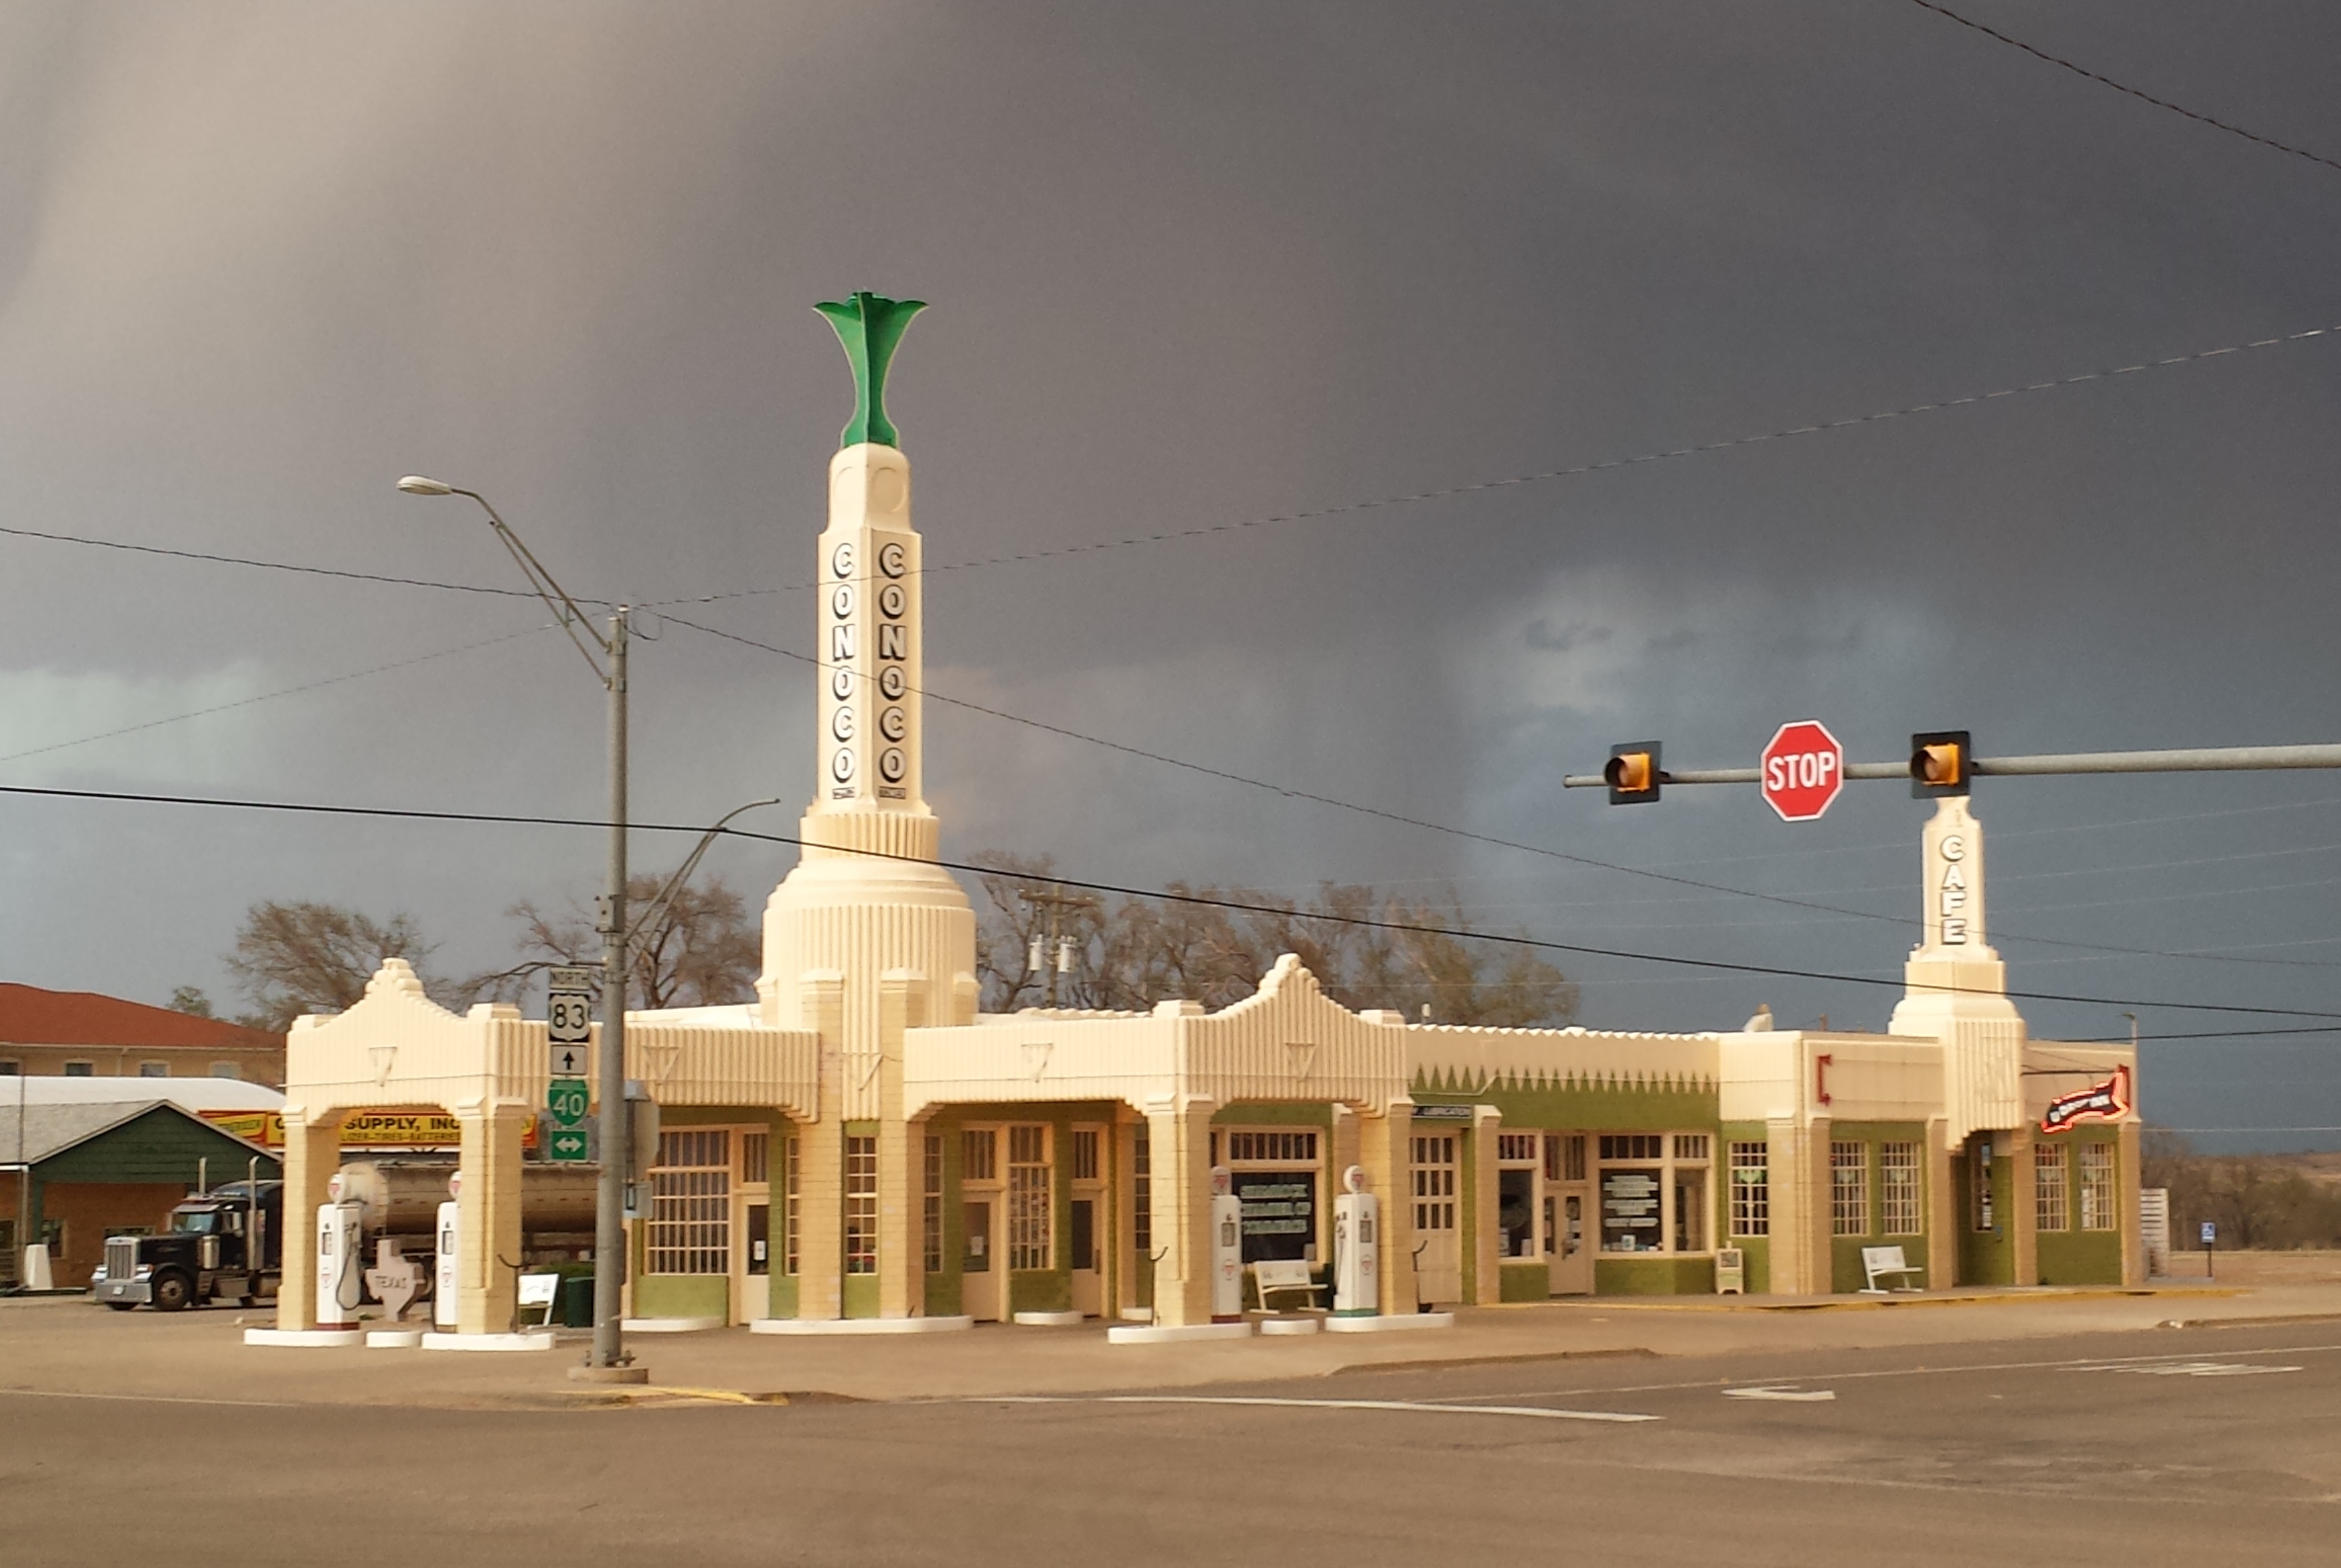 Route 66 Shamrock Texas, severe weather